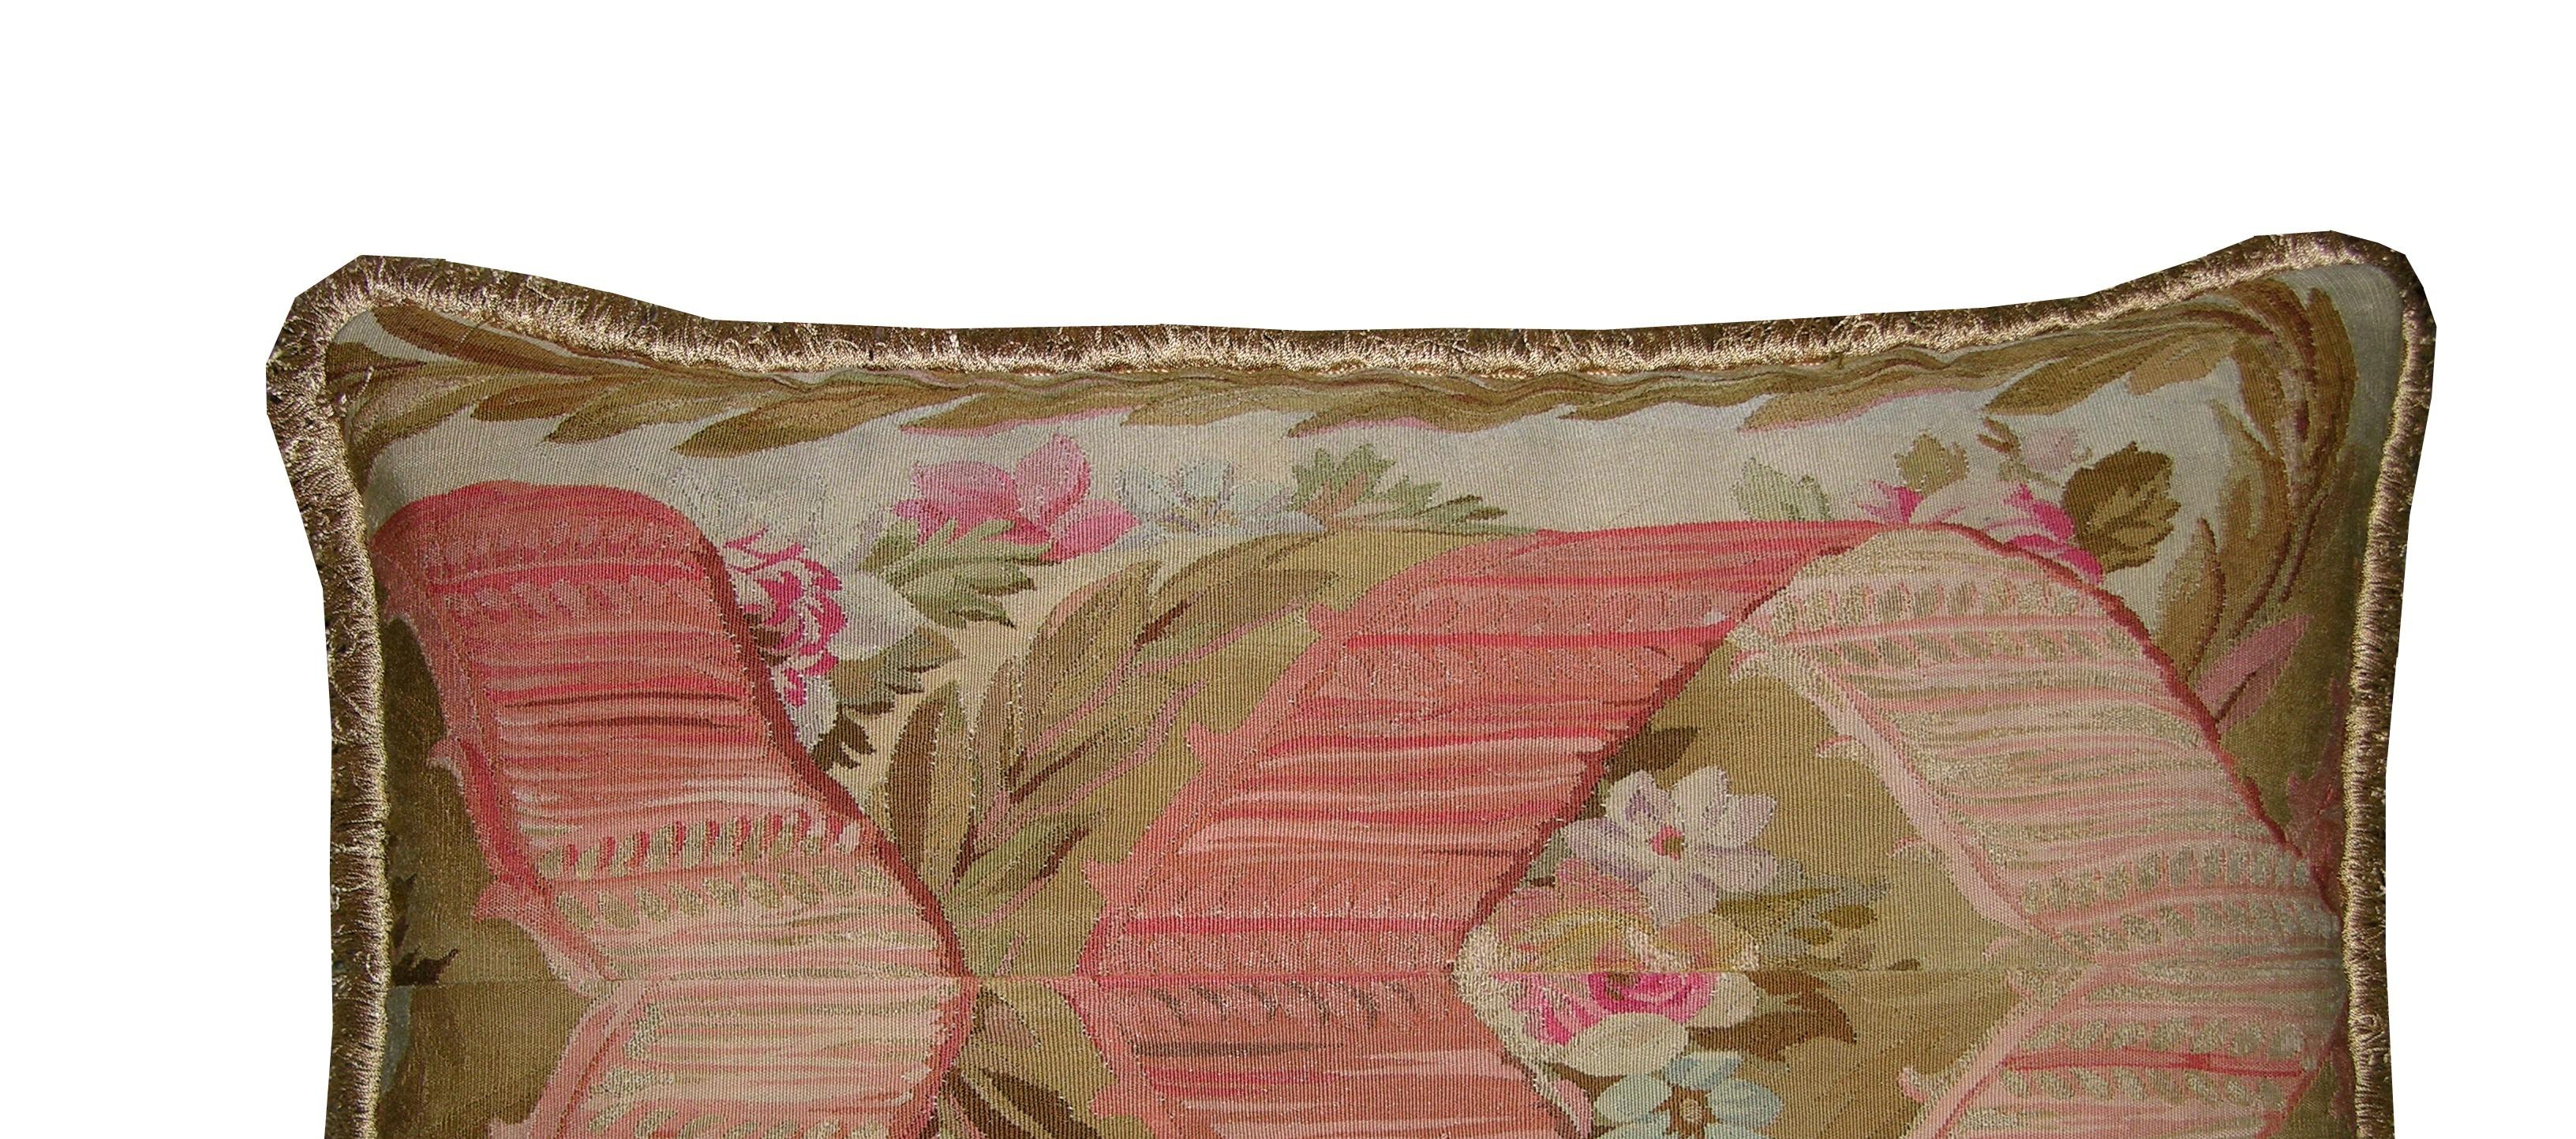 Circa 1860 Antique French Aubusson Pillow In Good Condition For Sale In Los Angeles, US